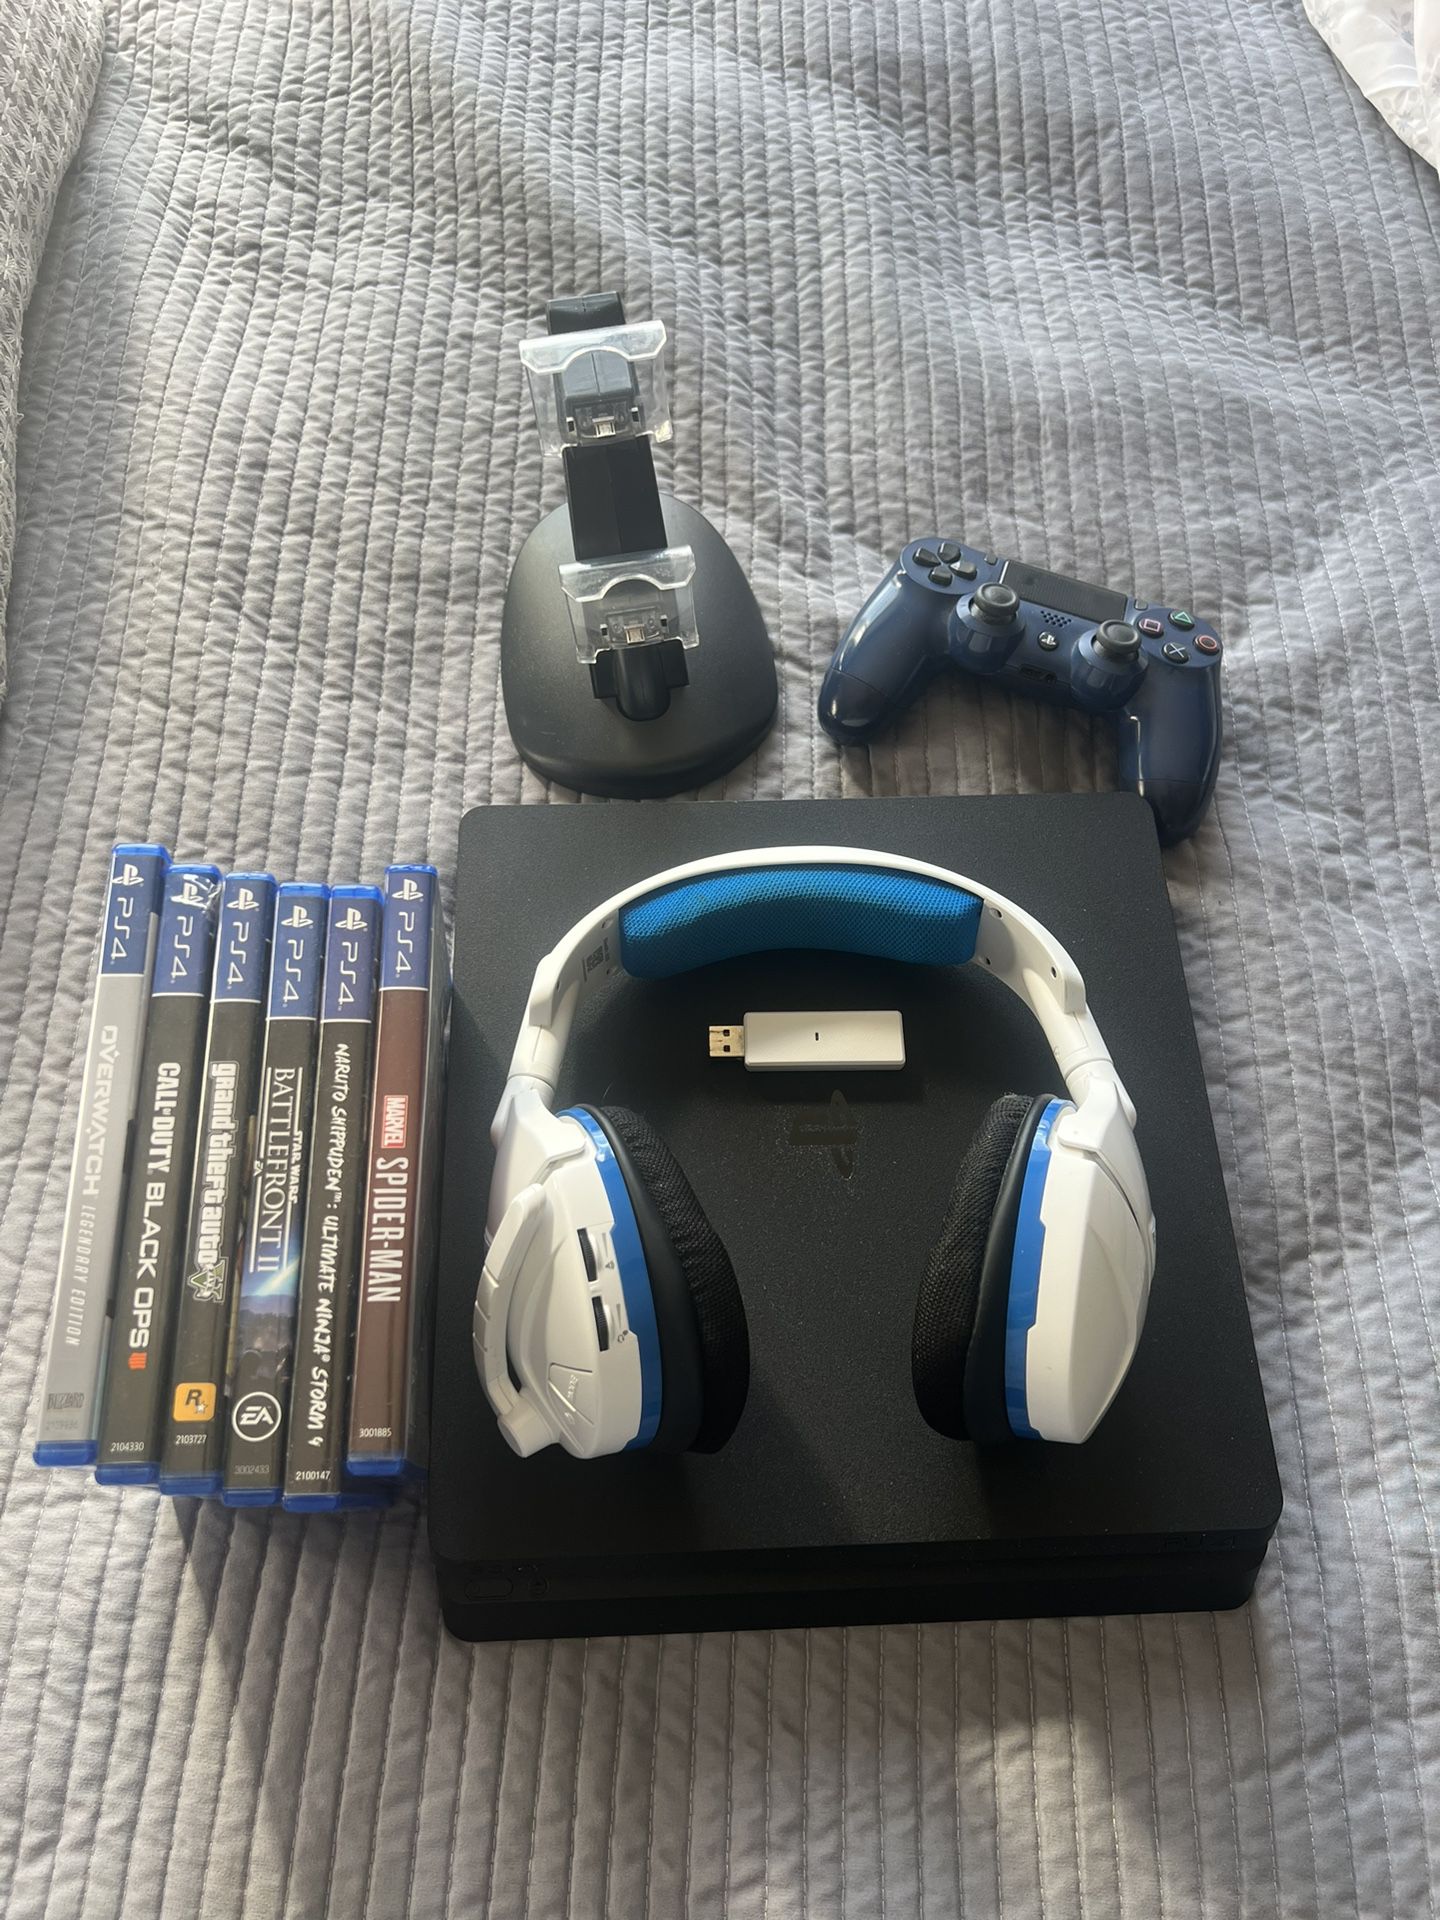 PS4,controller Stand, No Ps4 Controller, Turtle Beach Wireless Headset, And 6 Games 